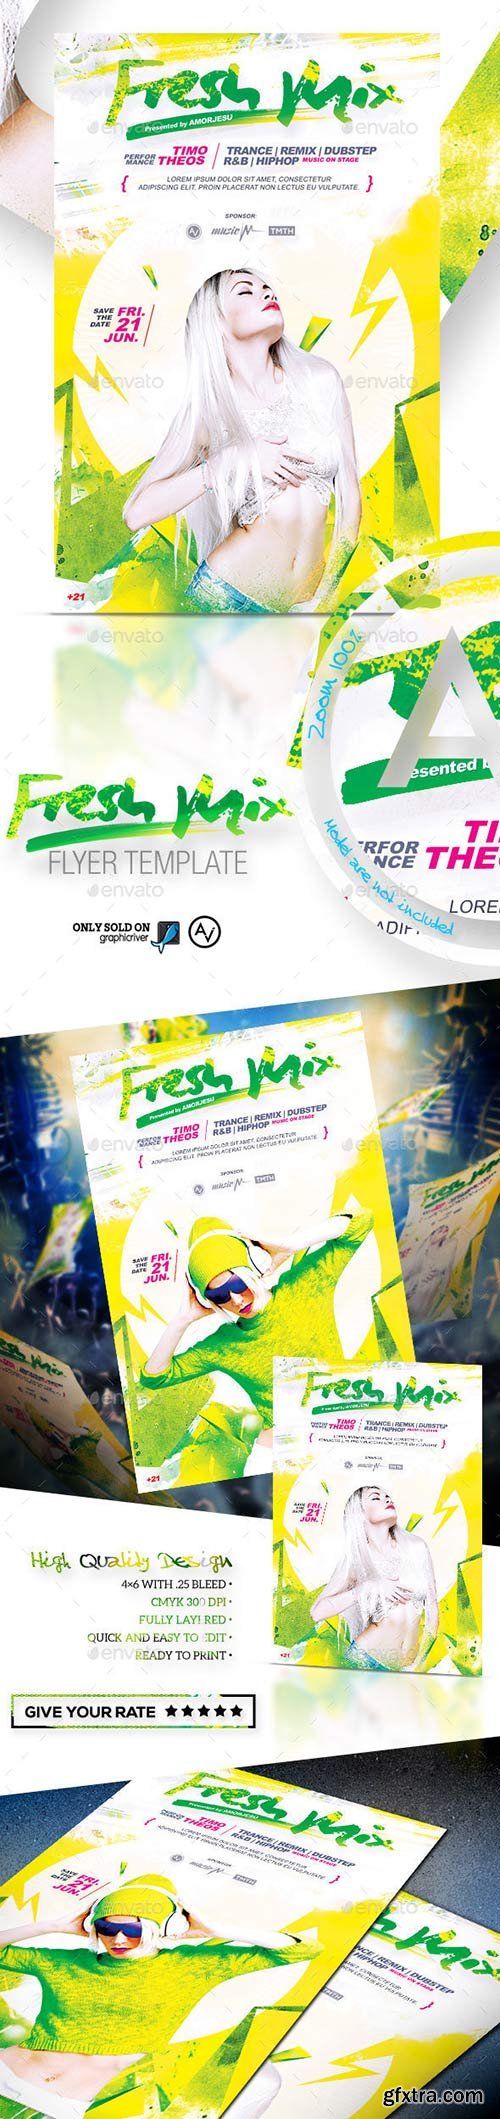 Graphicriver - Fresh Mix Flyer Template 11934274